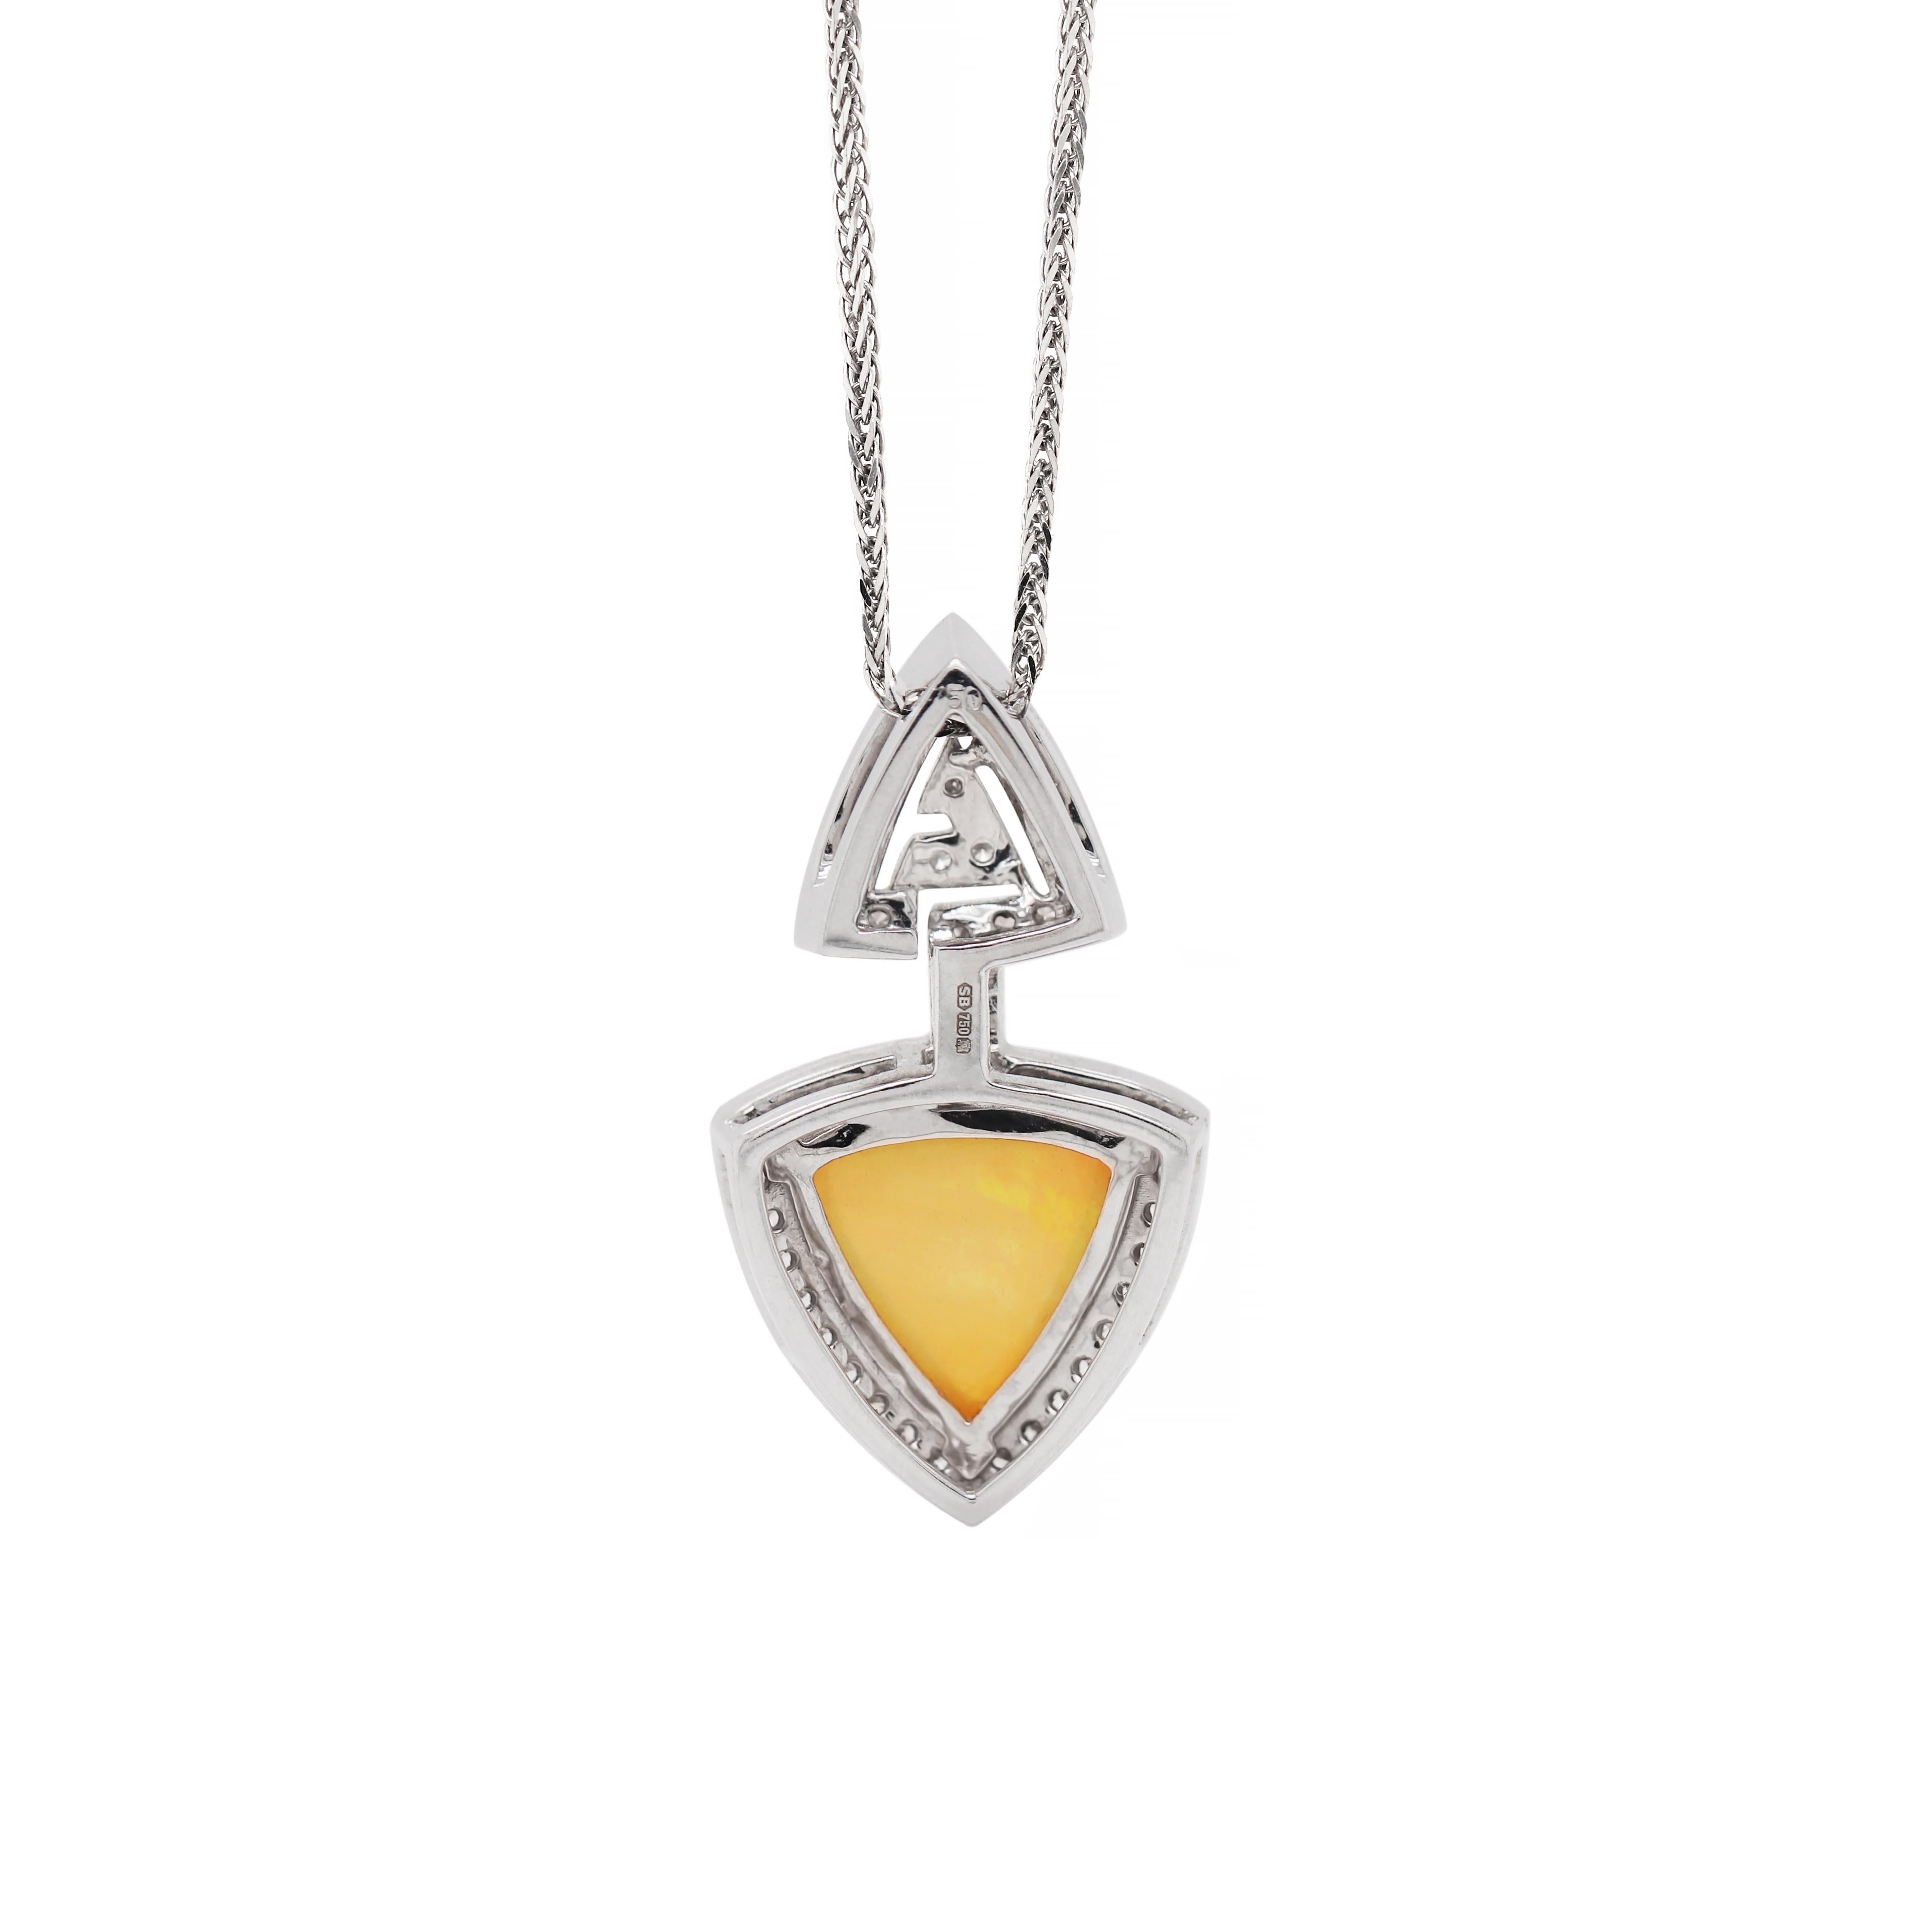 This unique necklace features a lovely triangle Ethiopian cabochon opal with a beautiful play of colour weighing approximately 4.25ct mounted in a three claw open back setting. This remarkable stone sits within a geometric triangular arrow designed